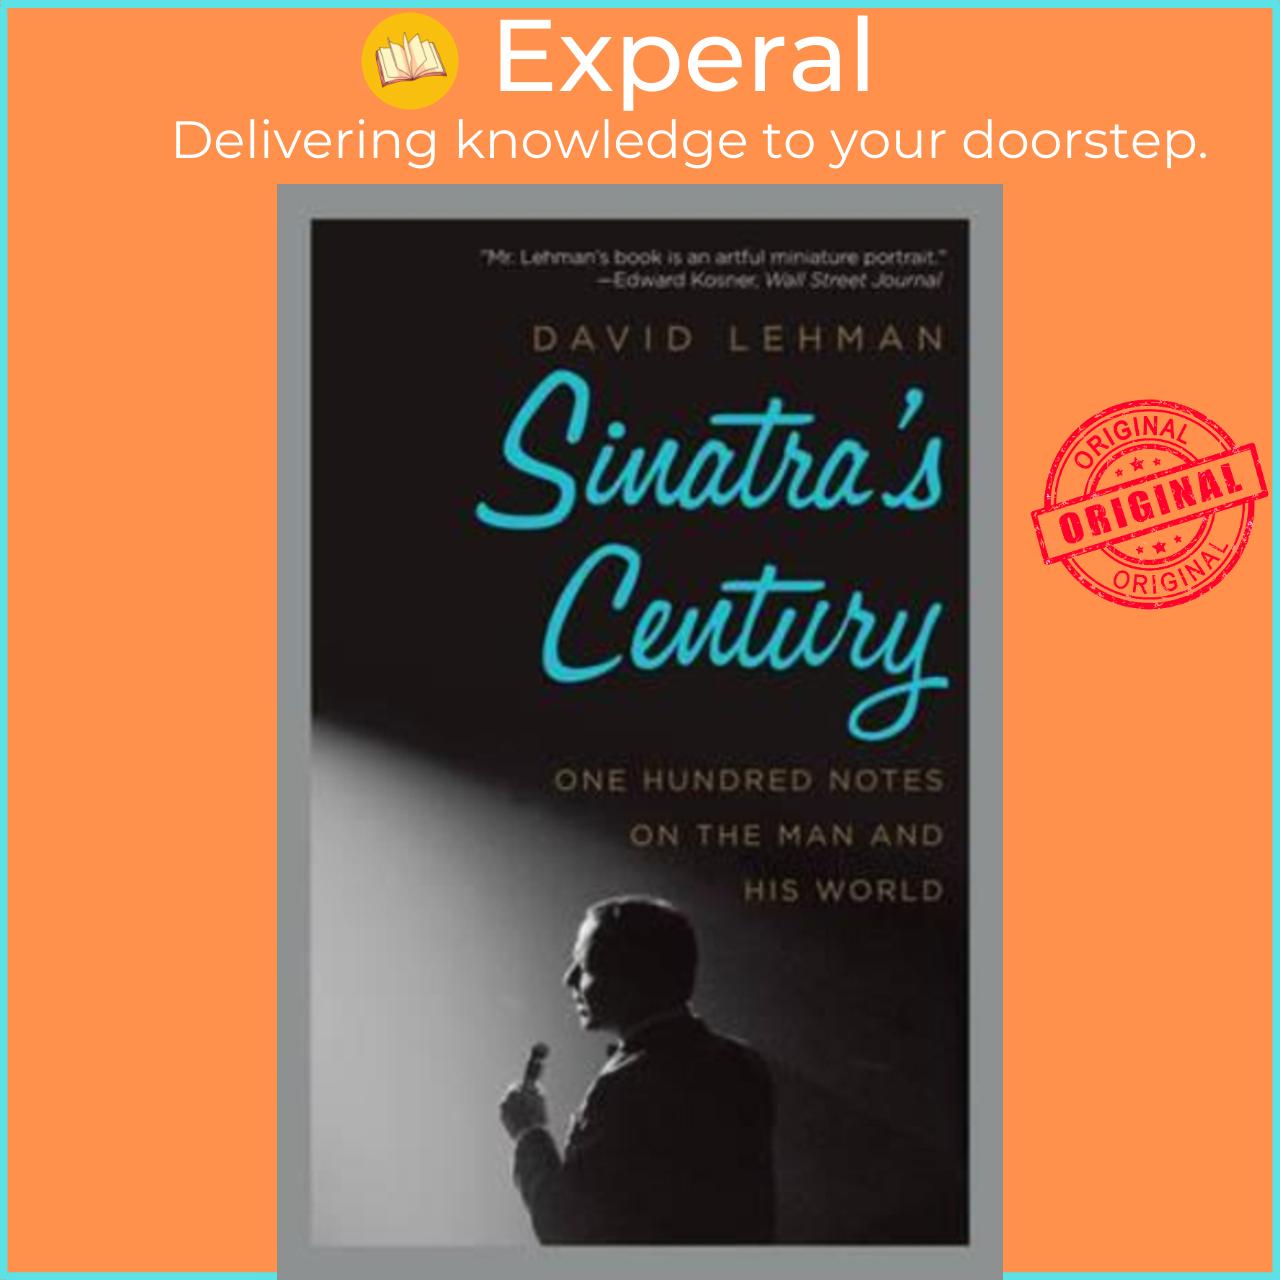 Sách - Sinatra's Century : One Hundred Notes on the Man and His World by David Lehman (US edition, paperback)